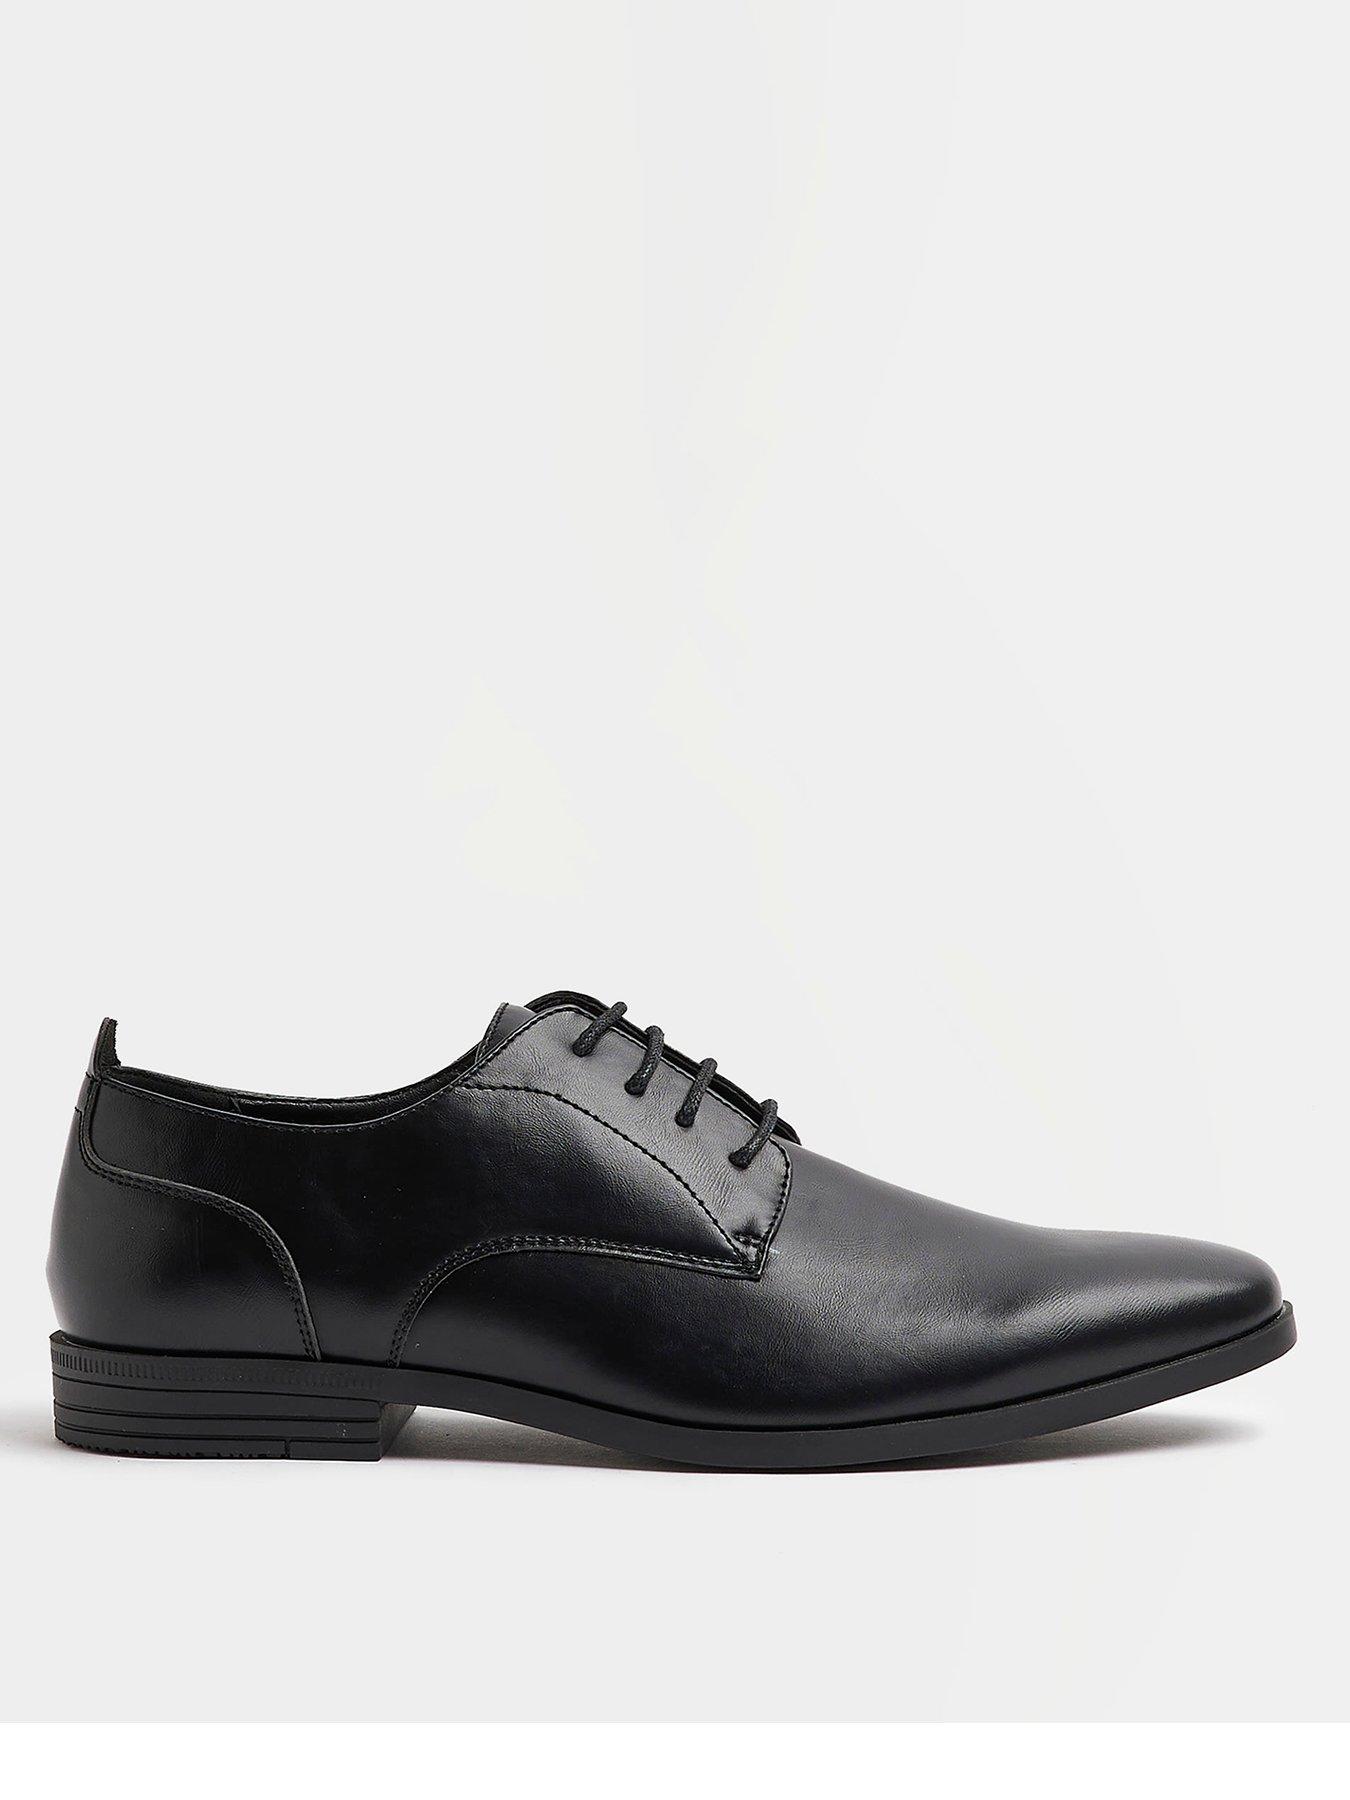 Save 7% Churchs Leather Lace-up Derby Shoes in Black for Men Mens Shoes Lace-ups Derby shoes 